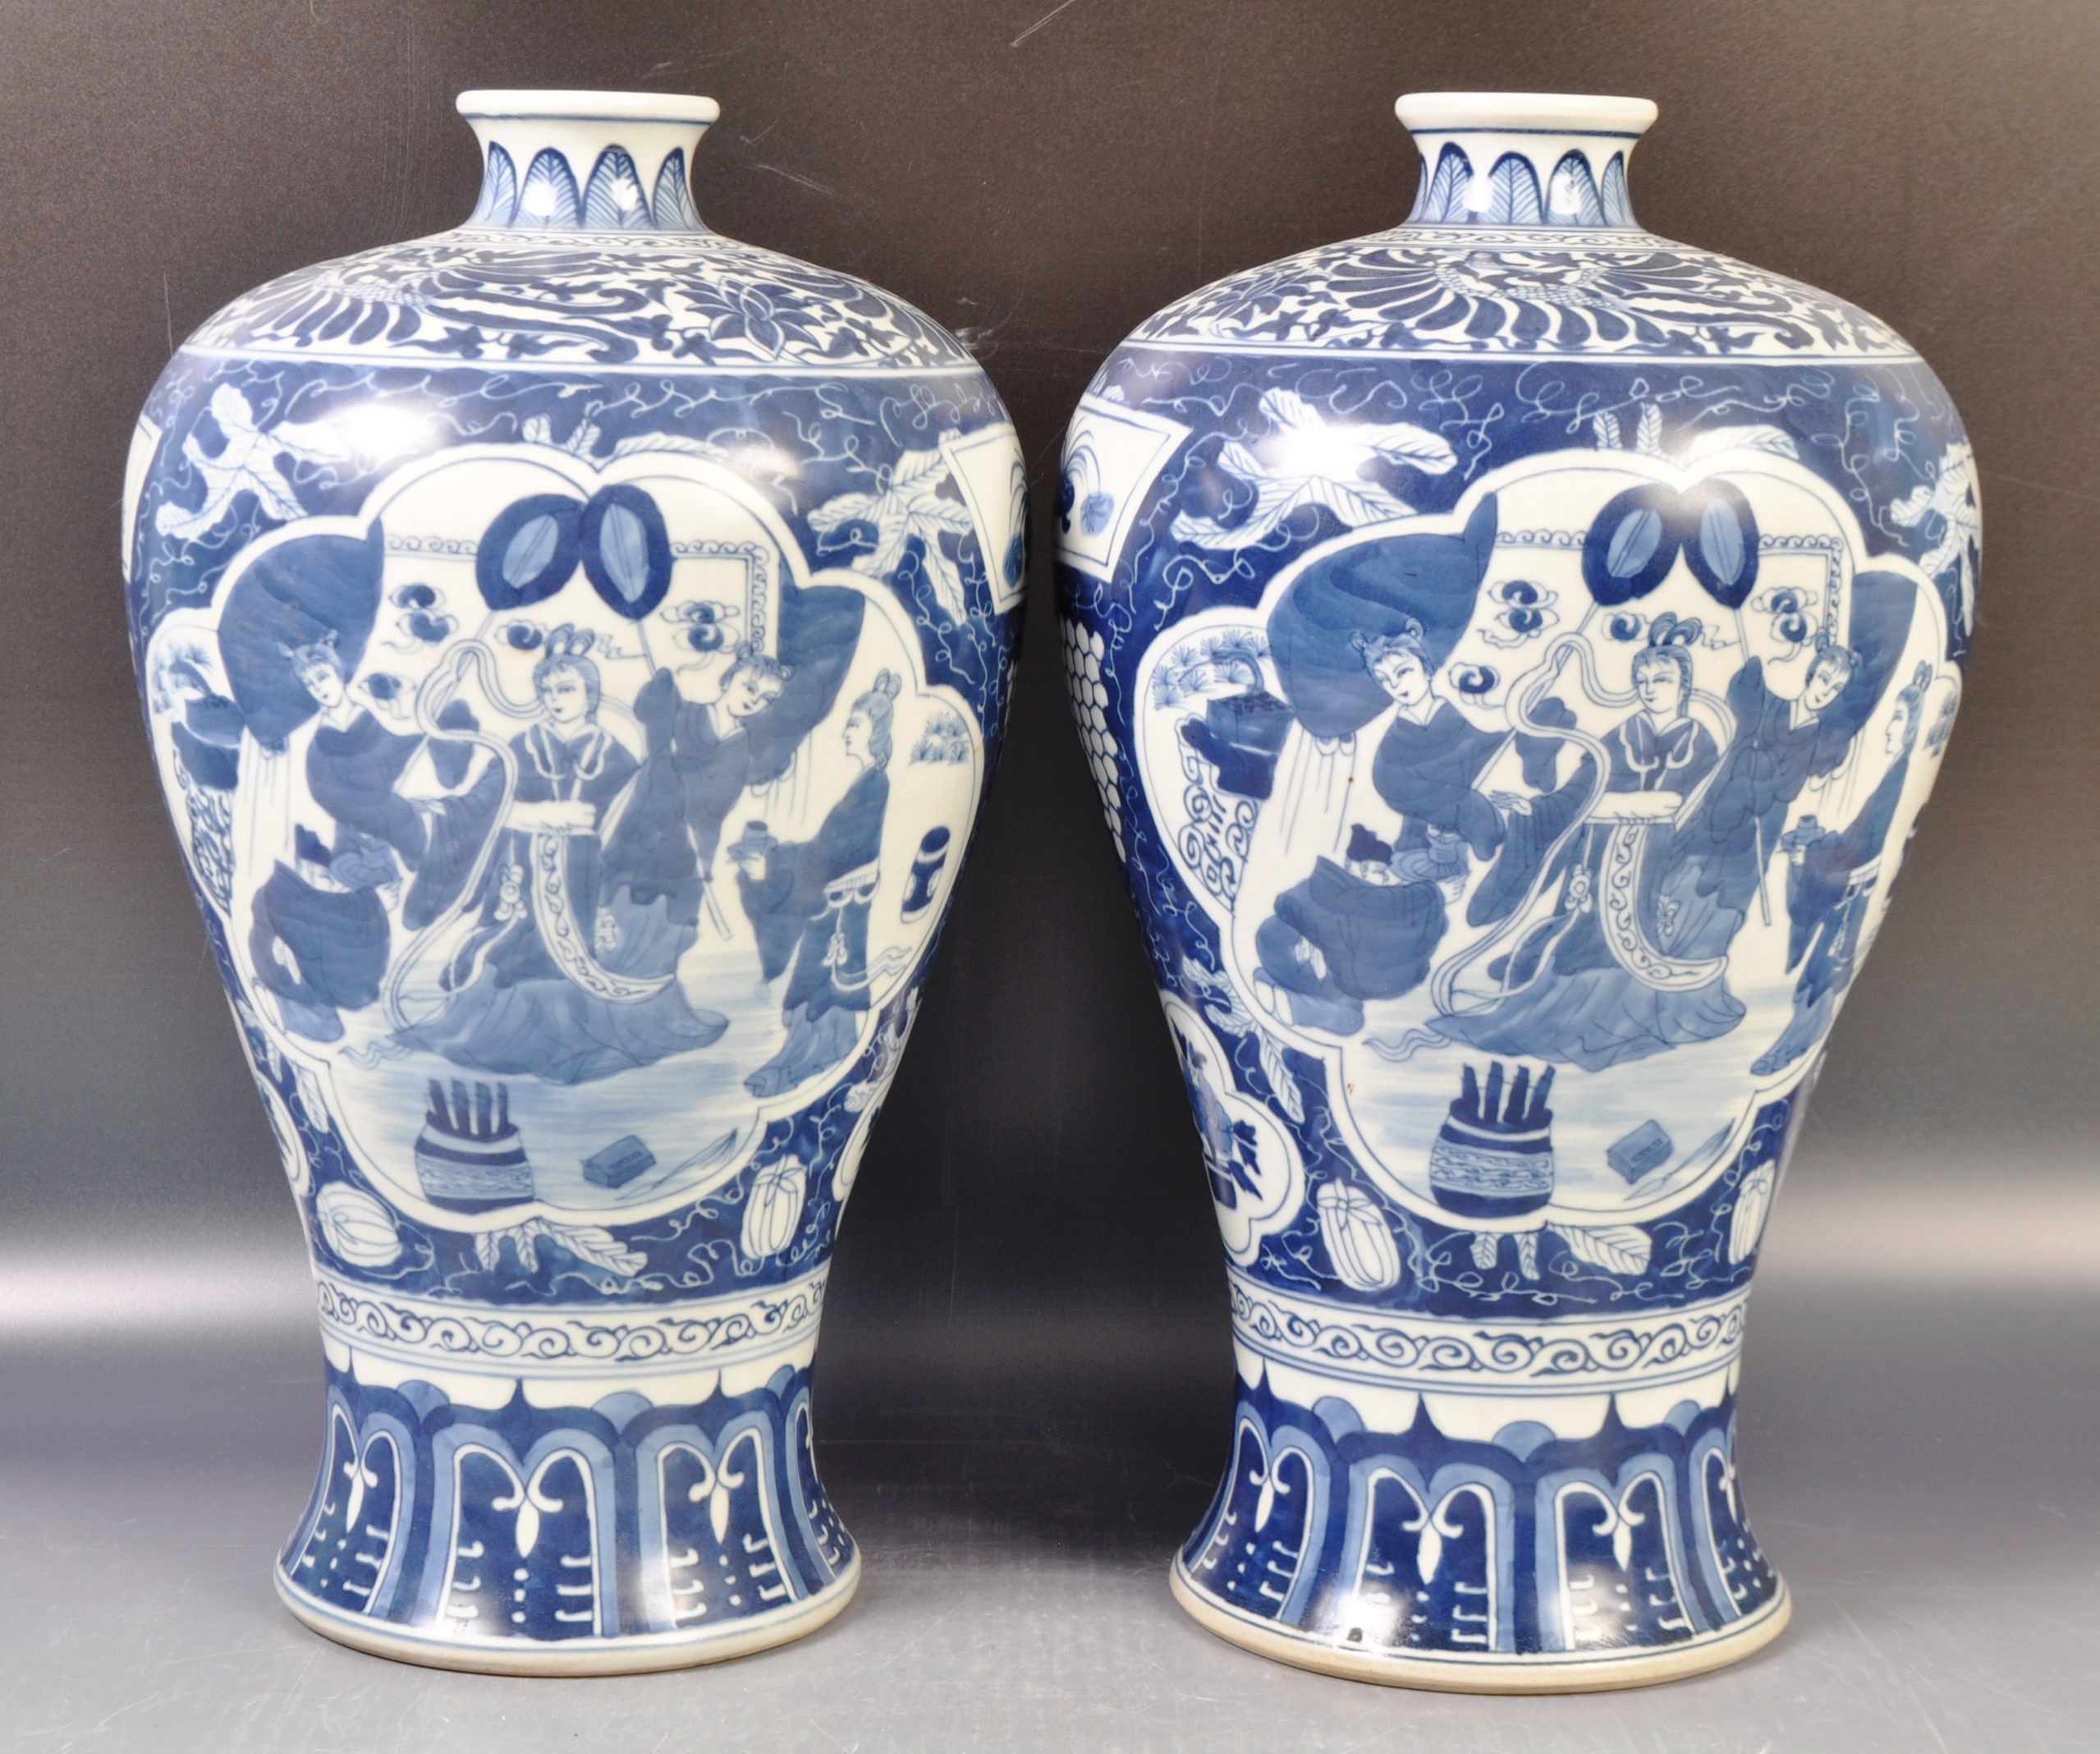 PAIR OF LARGE CHINESE WANLI MARK MEIPING SHAPE VASES